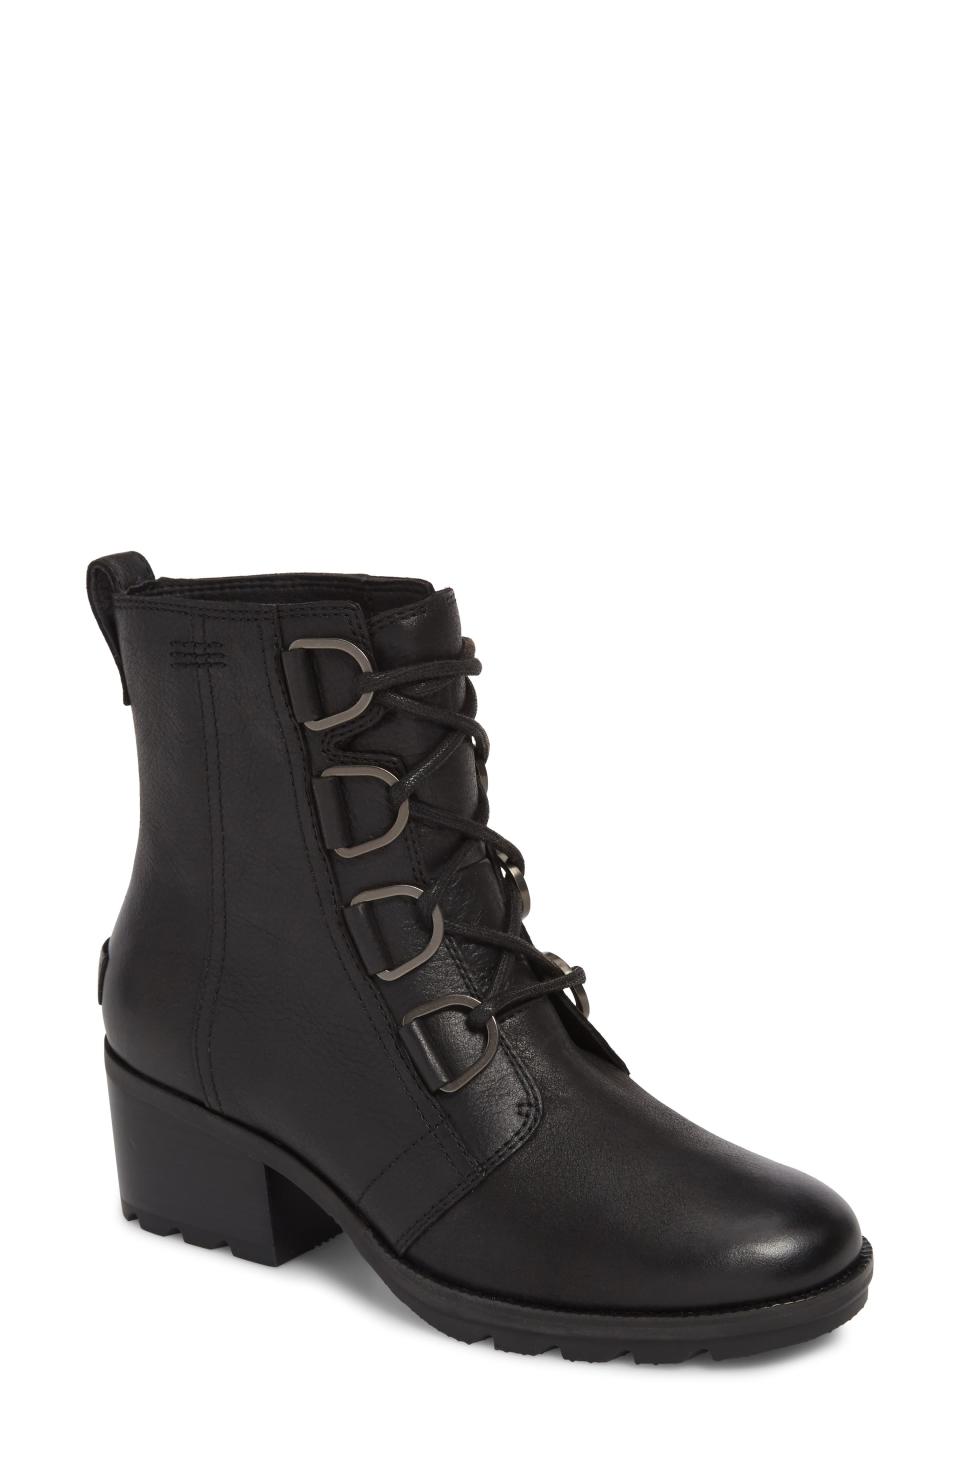 10) Cate Waterproof Lace-Up Boot